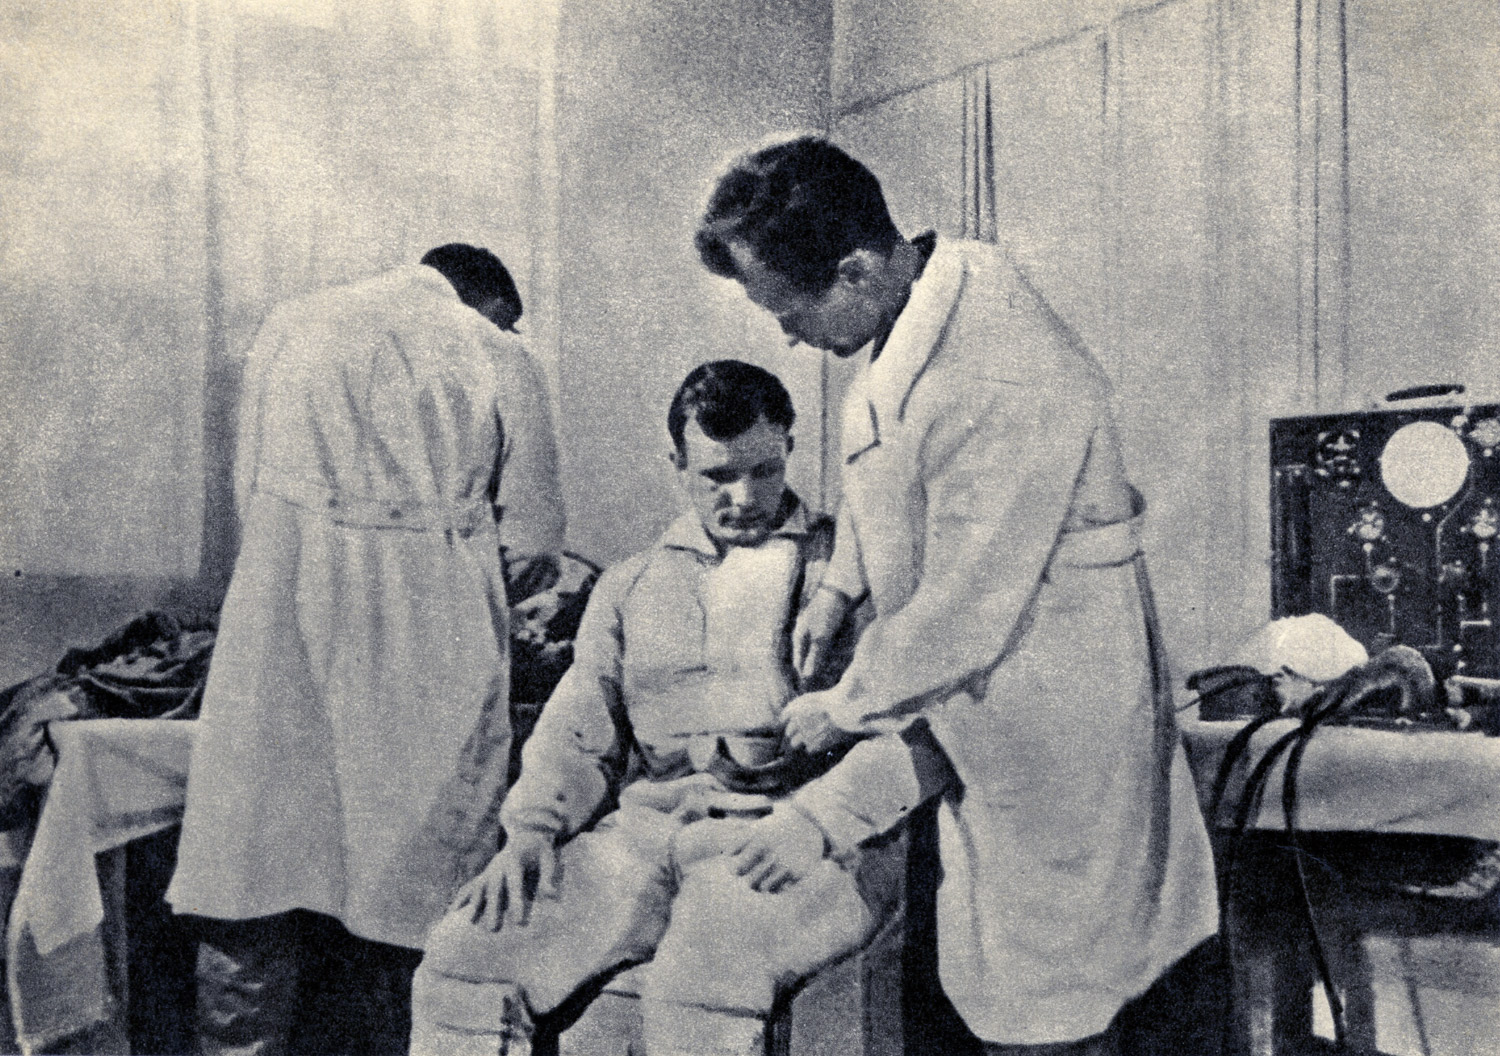 Drawn from the film First Trip to the Stars, Gagarin is shown being examined before his flight